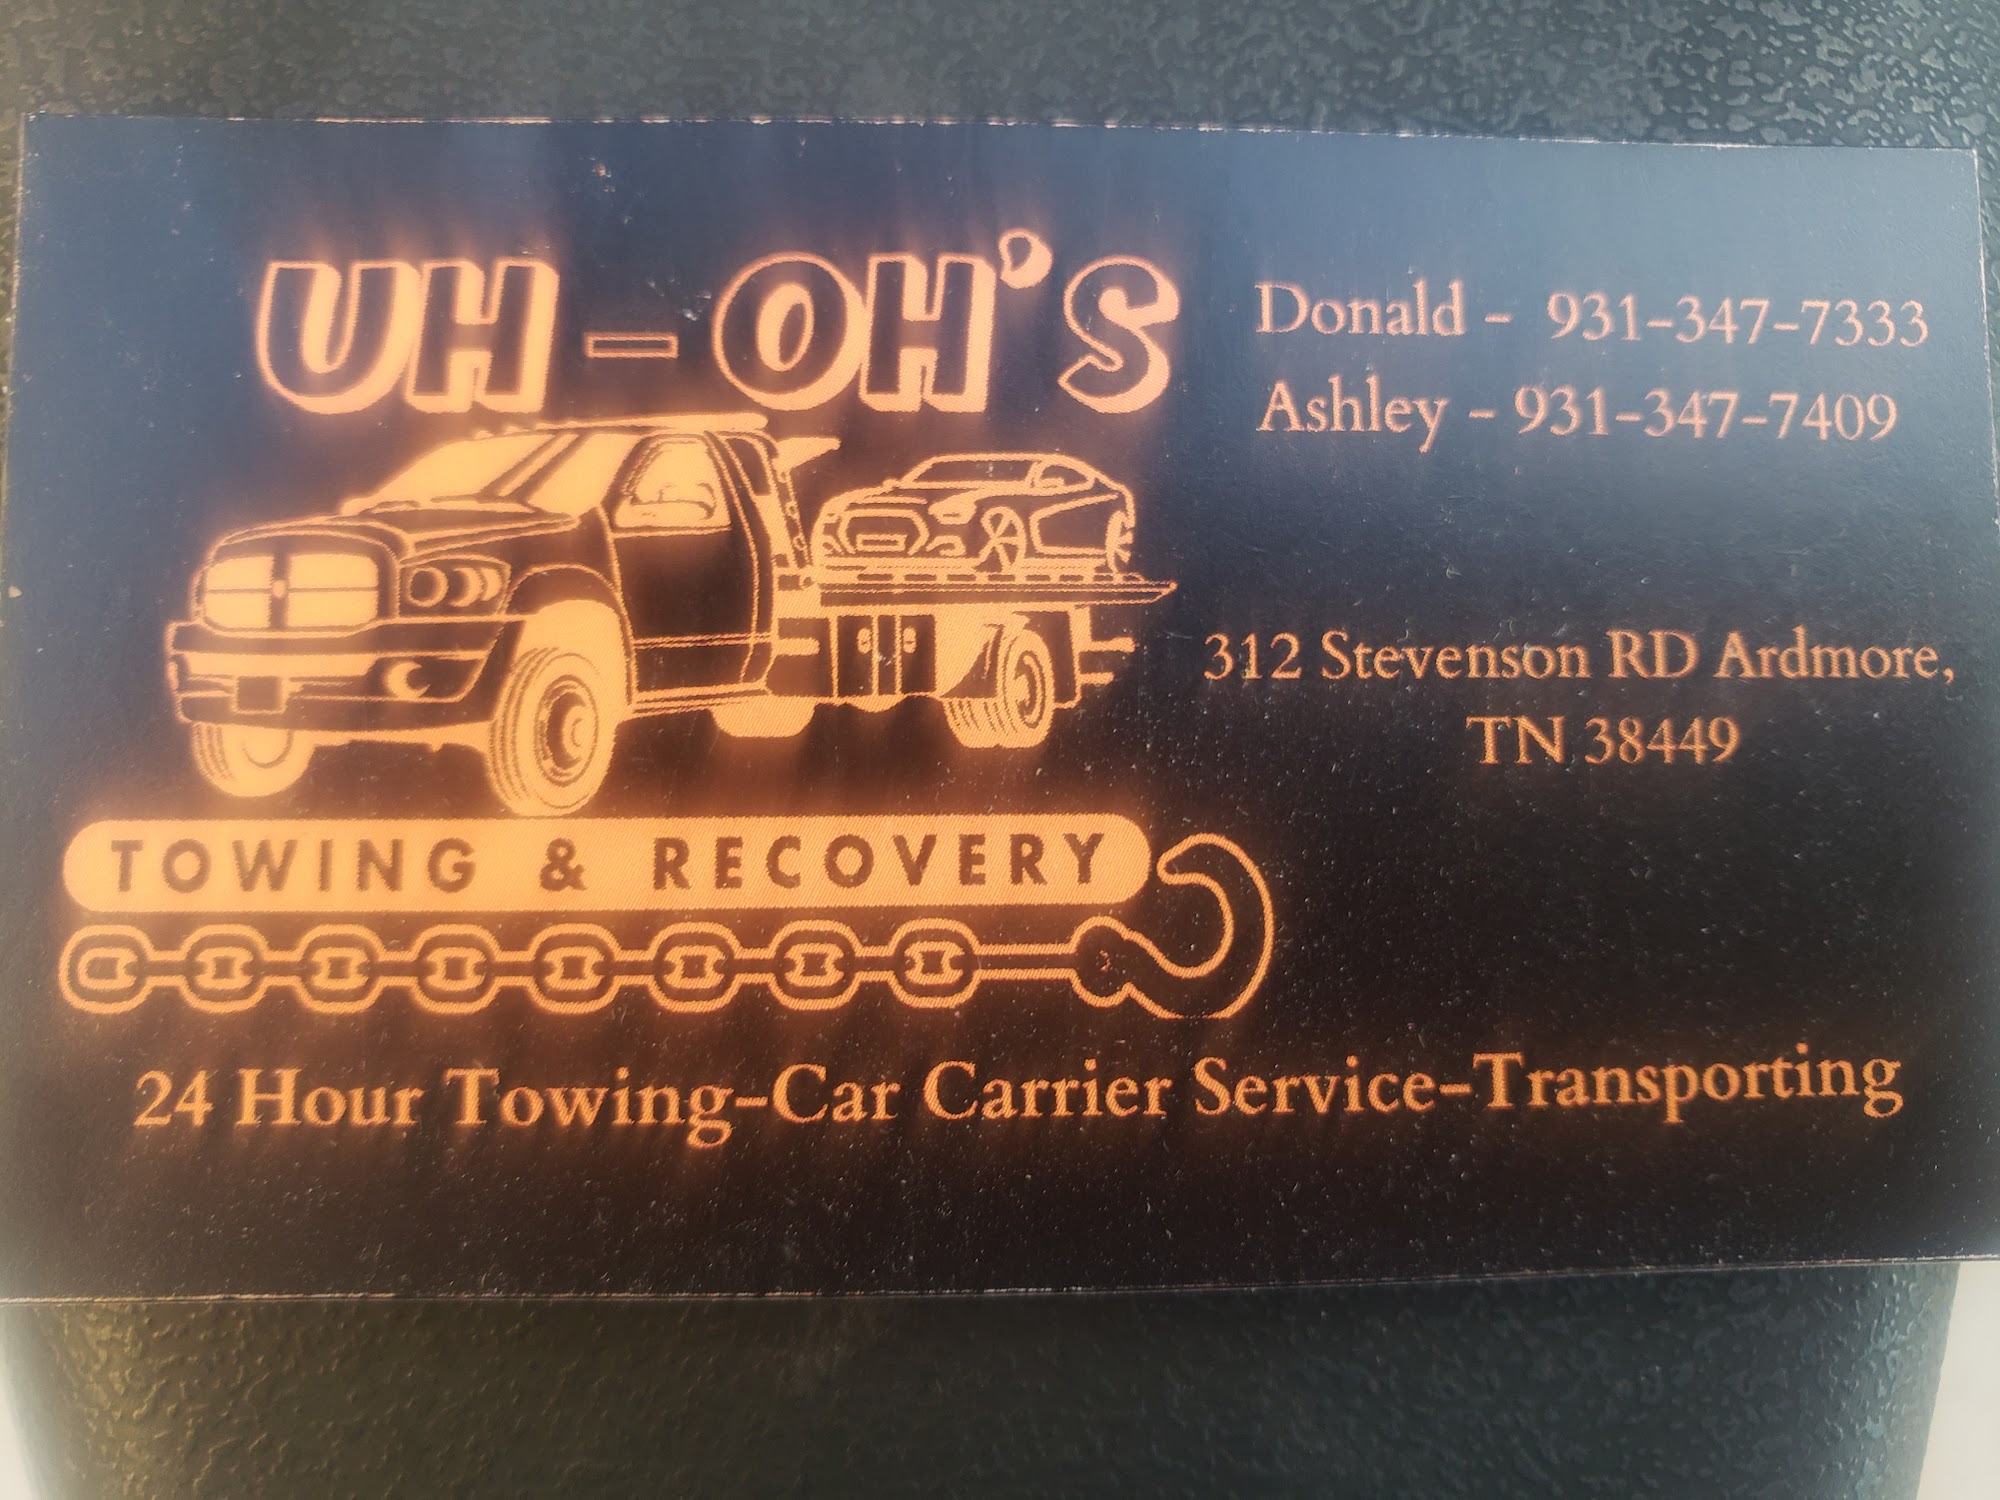 Uh-Oh's Towing and Recovery 312 Stevenson Rd, Ardmore Tennessee 38449